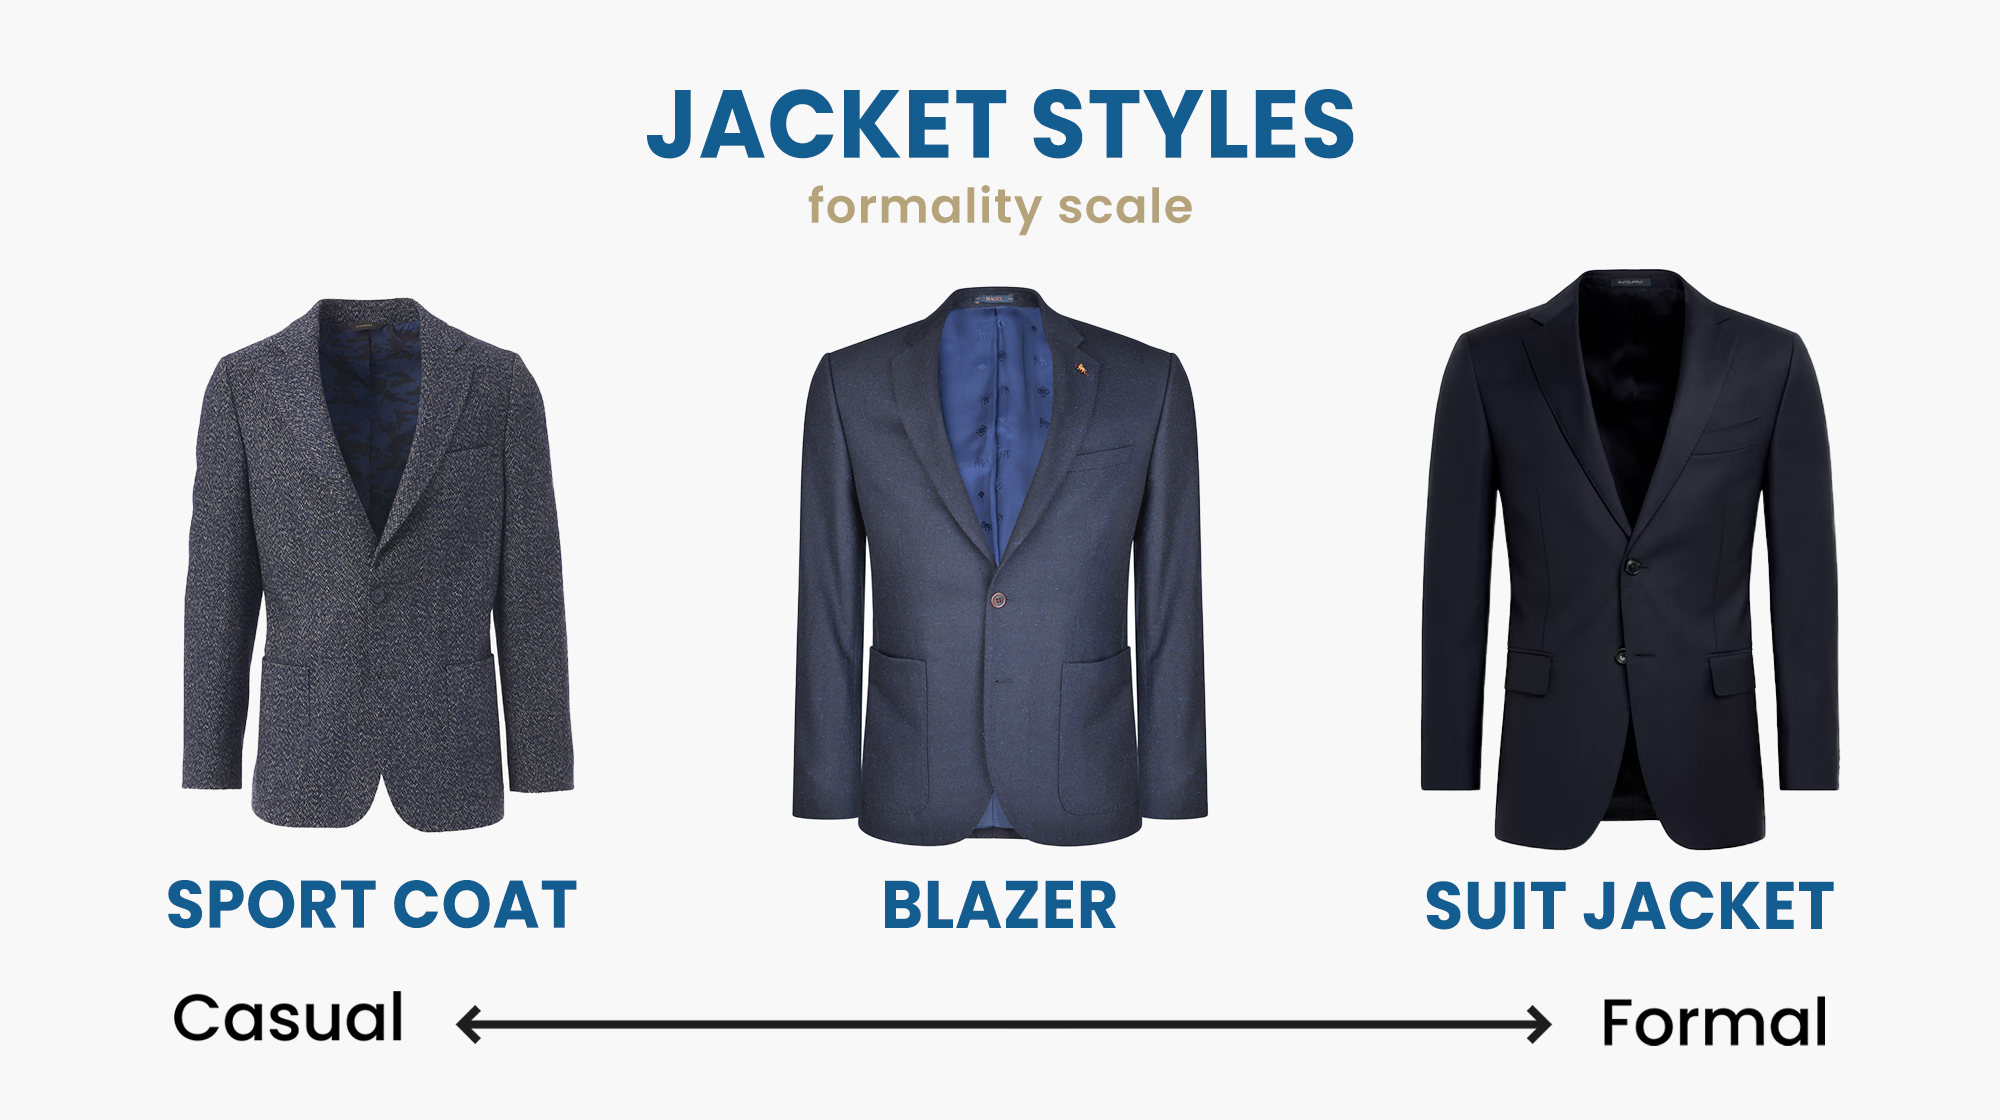 Sports Jacket vs Blazer vs Suit - What's The Difference? - RealMenRealStyle